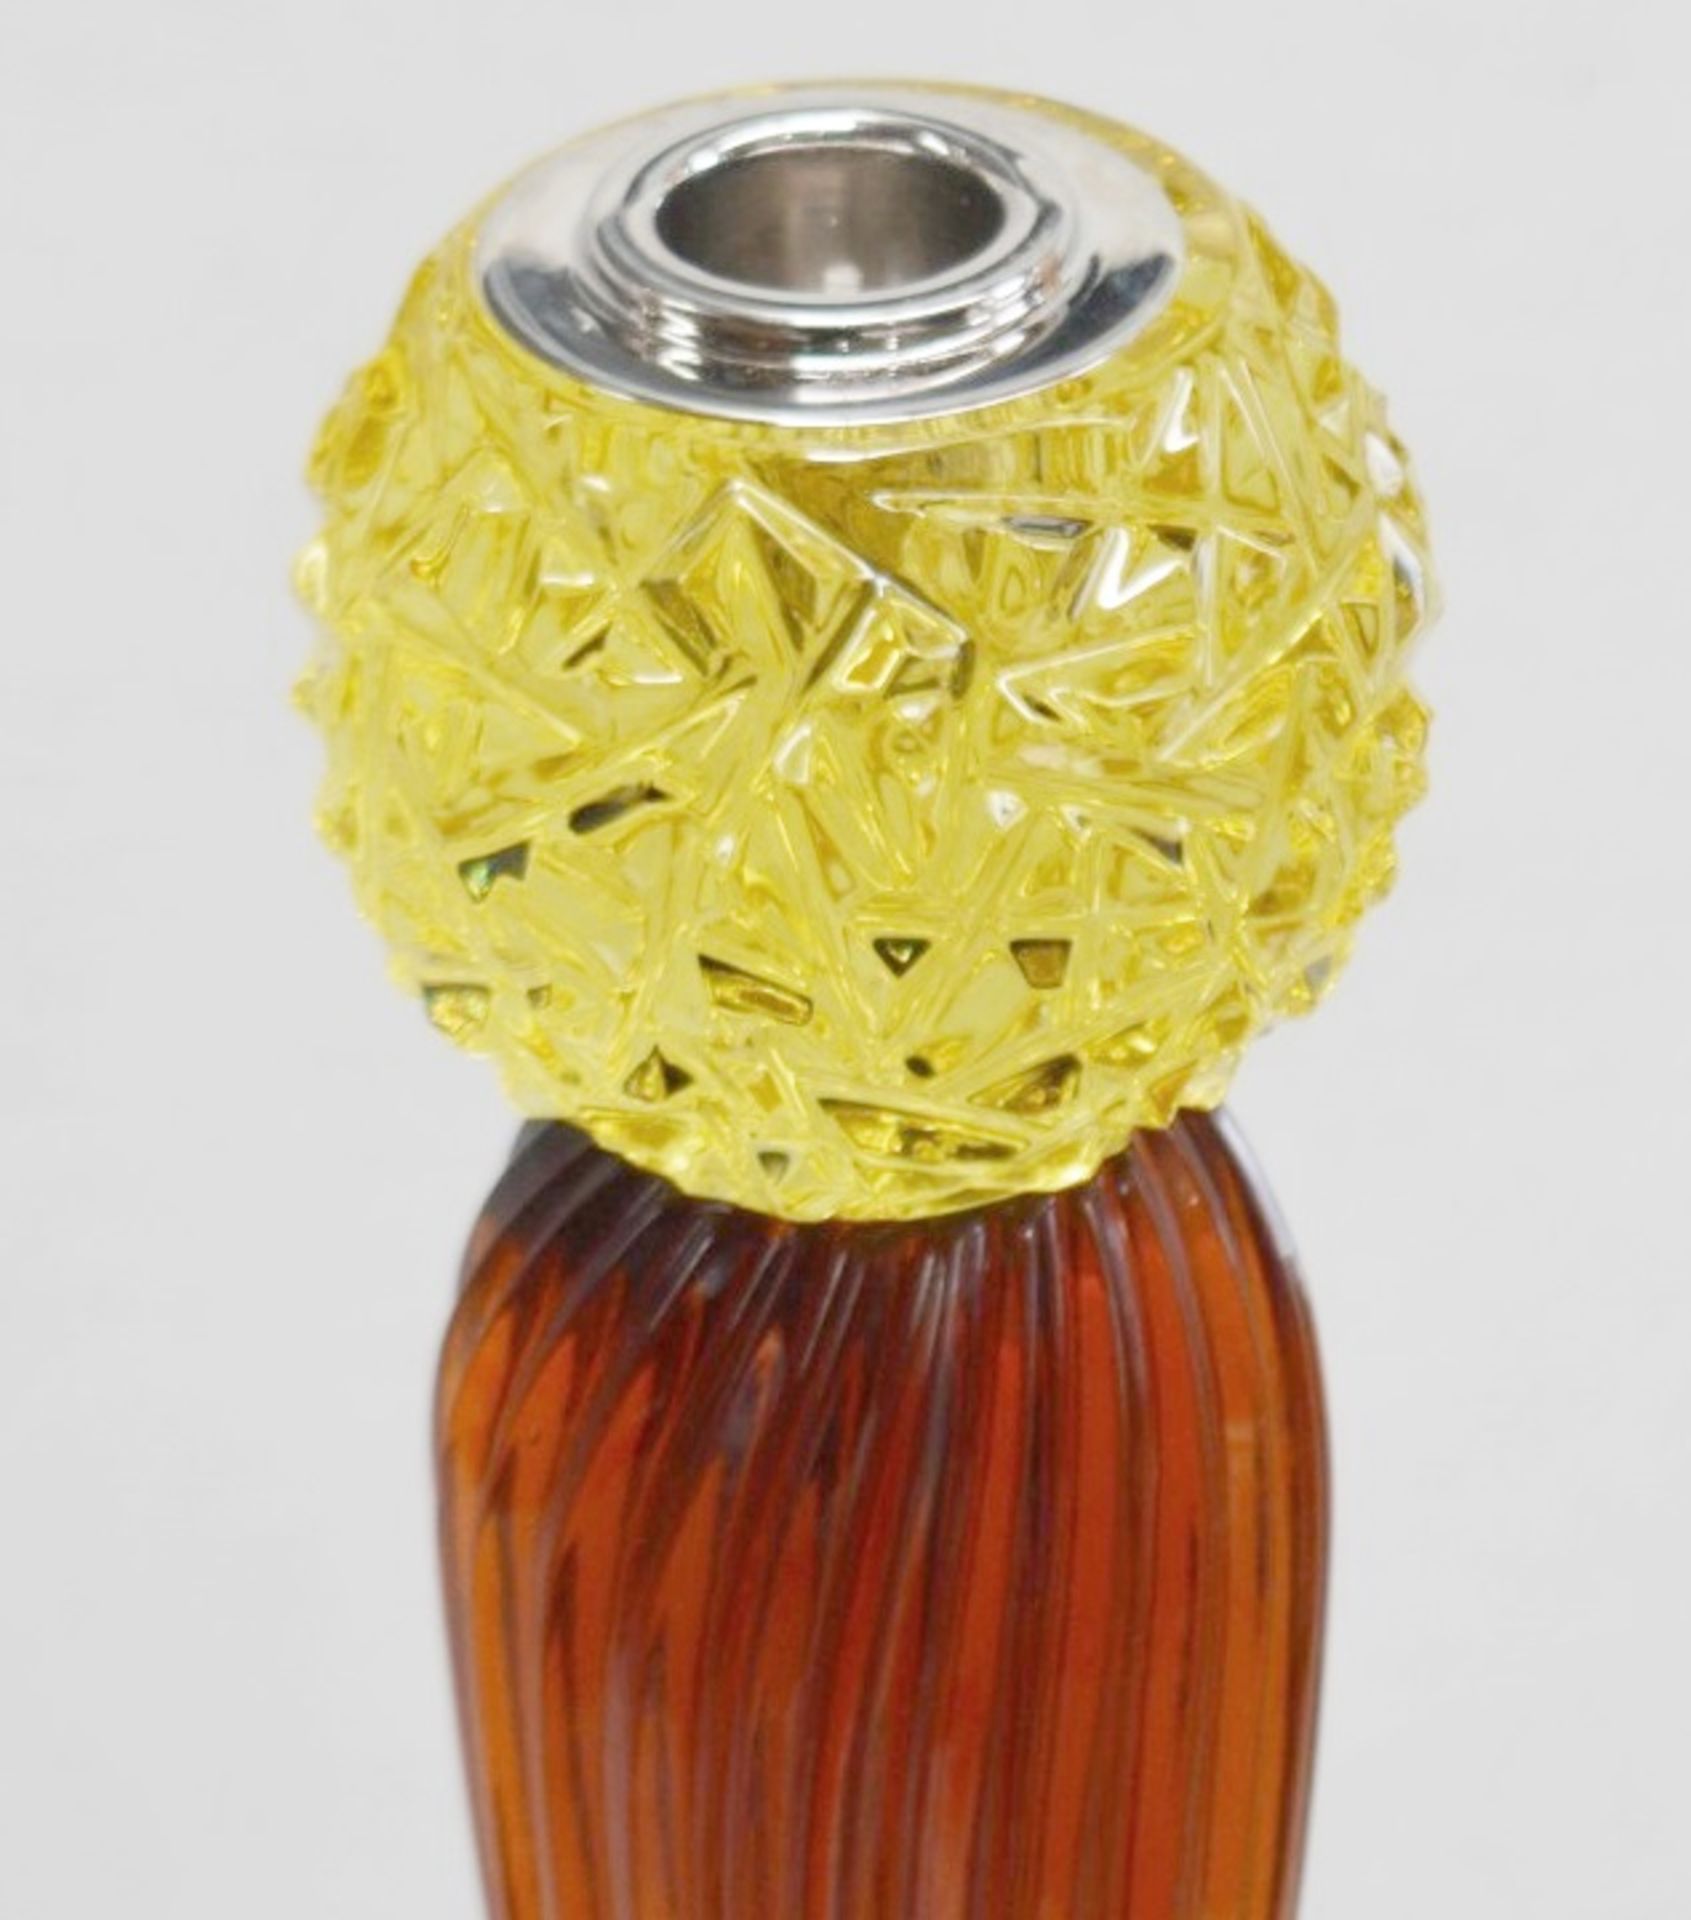 1 x BALDI 'Home Jewels' Italian Hand-crafted Glass Candle Stick **Original RRP £2.665.00** - Image 3 of 5